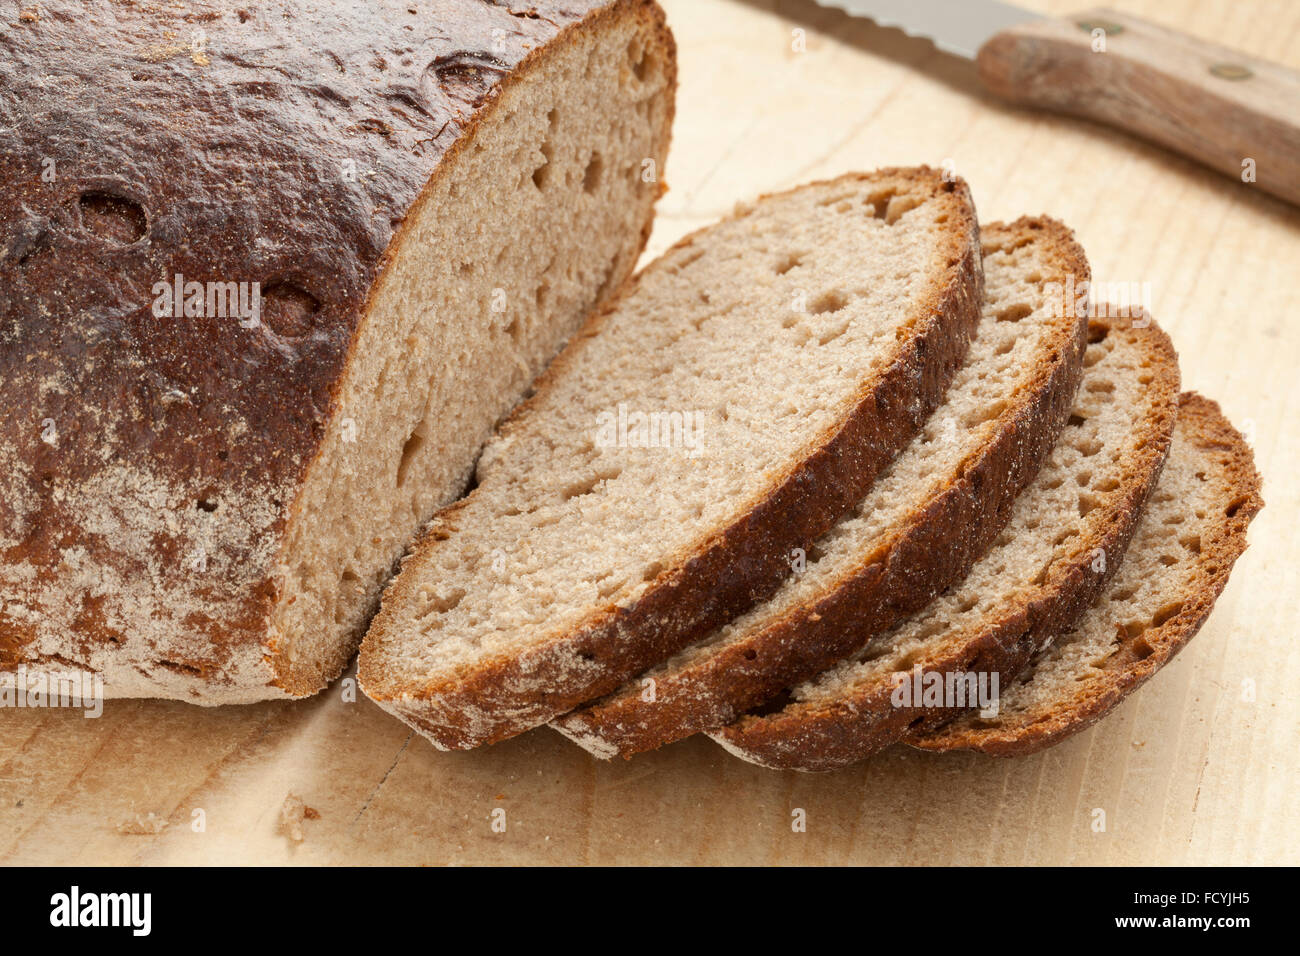 Loaf of healthy German Sourdough bread and slices Stock Photo